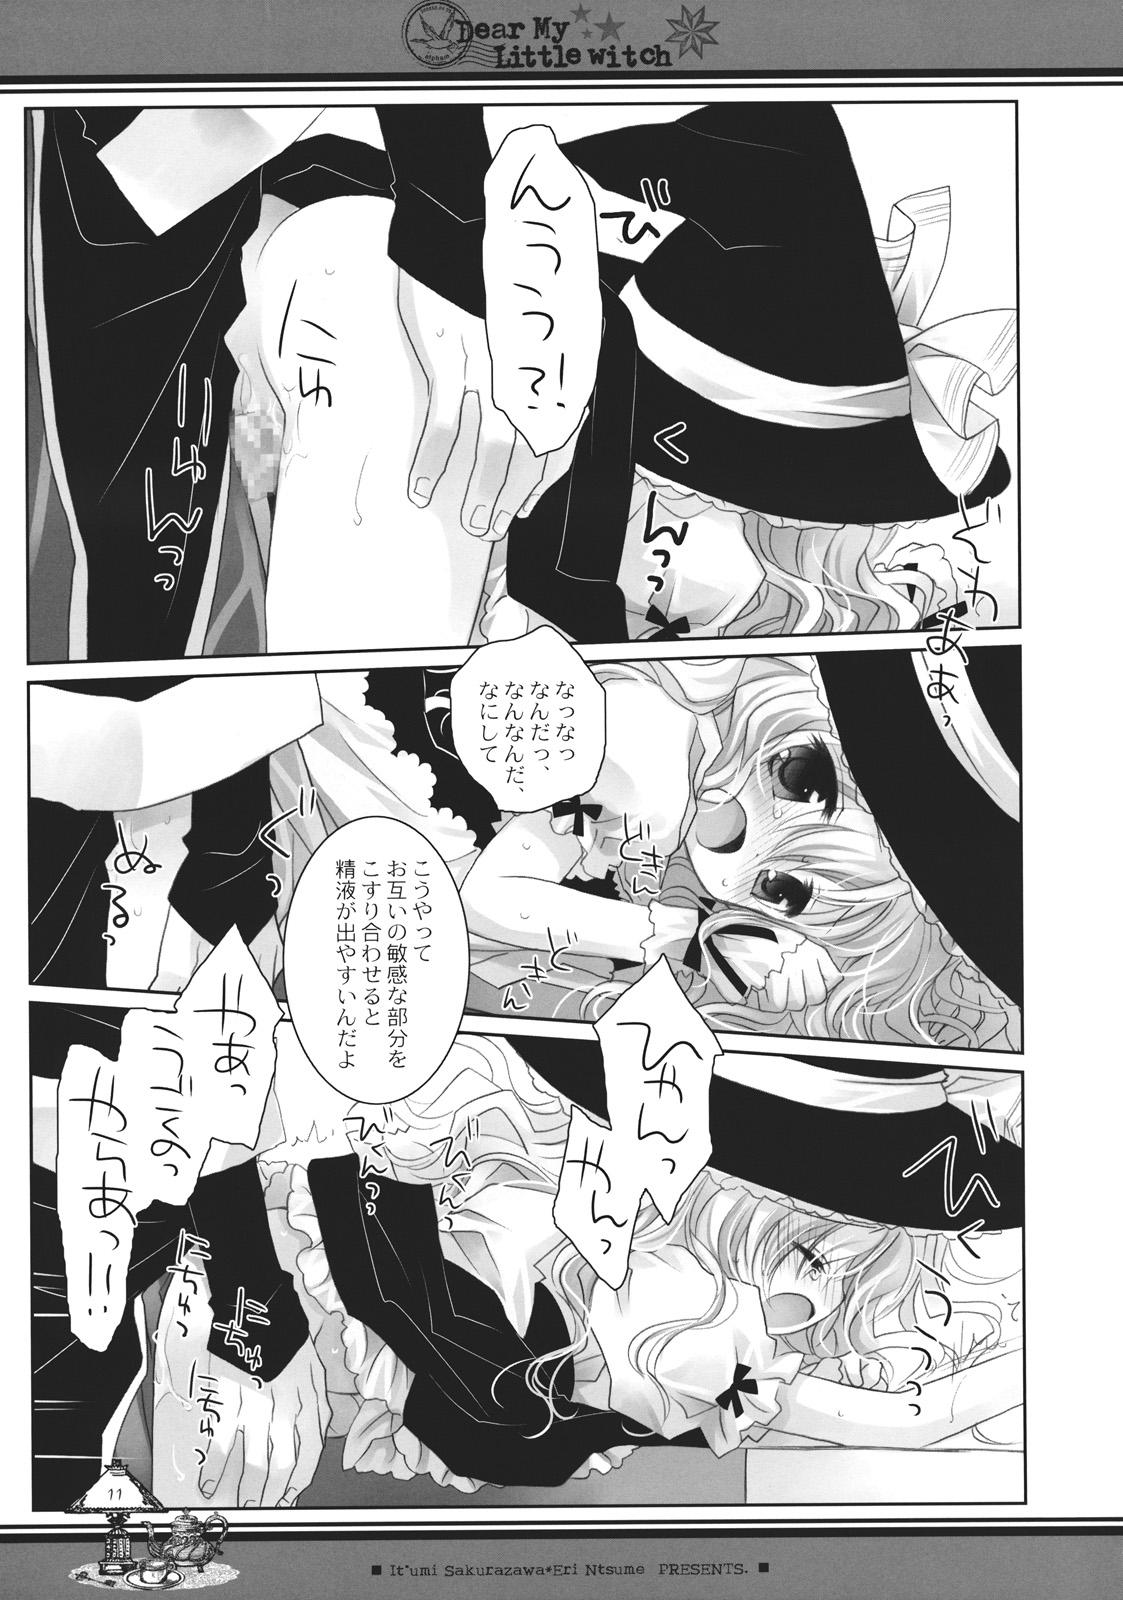 Butts Dear My Little Witch - Touhou project Mouth - Page 11